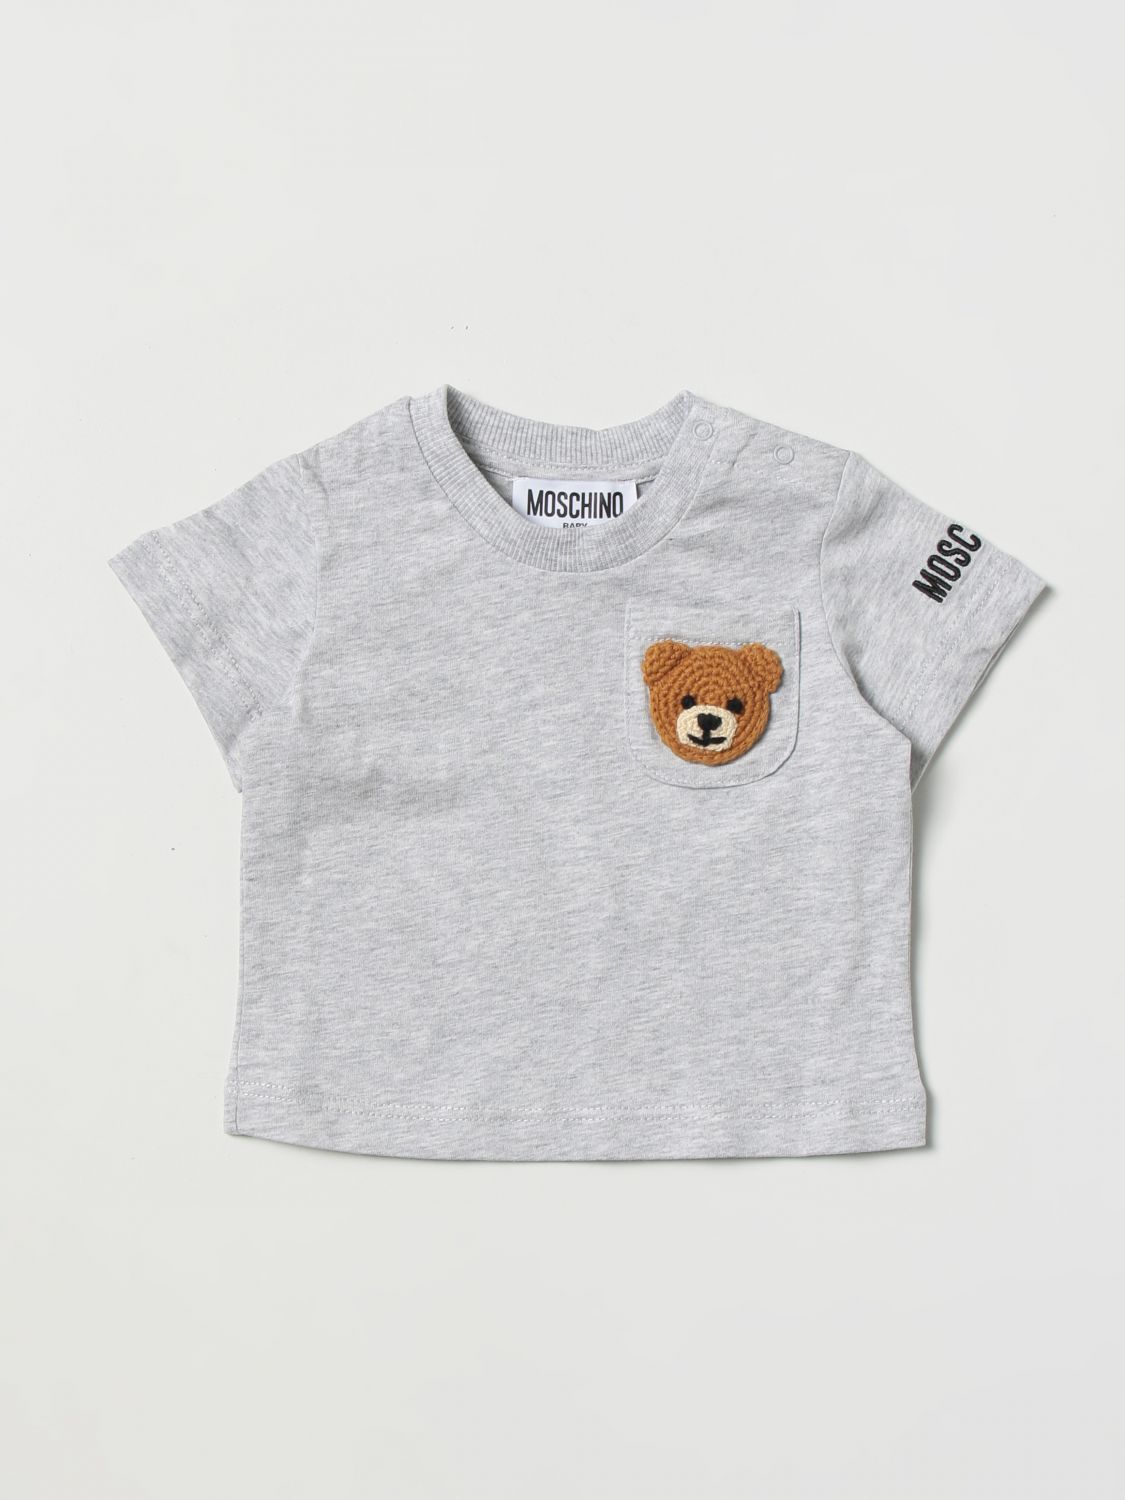 Moschino Baby T-shirt  Kids Color Grey